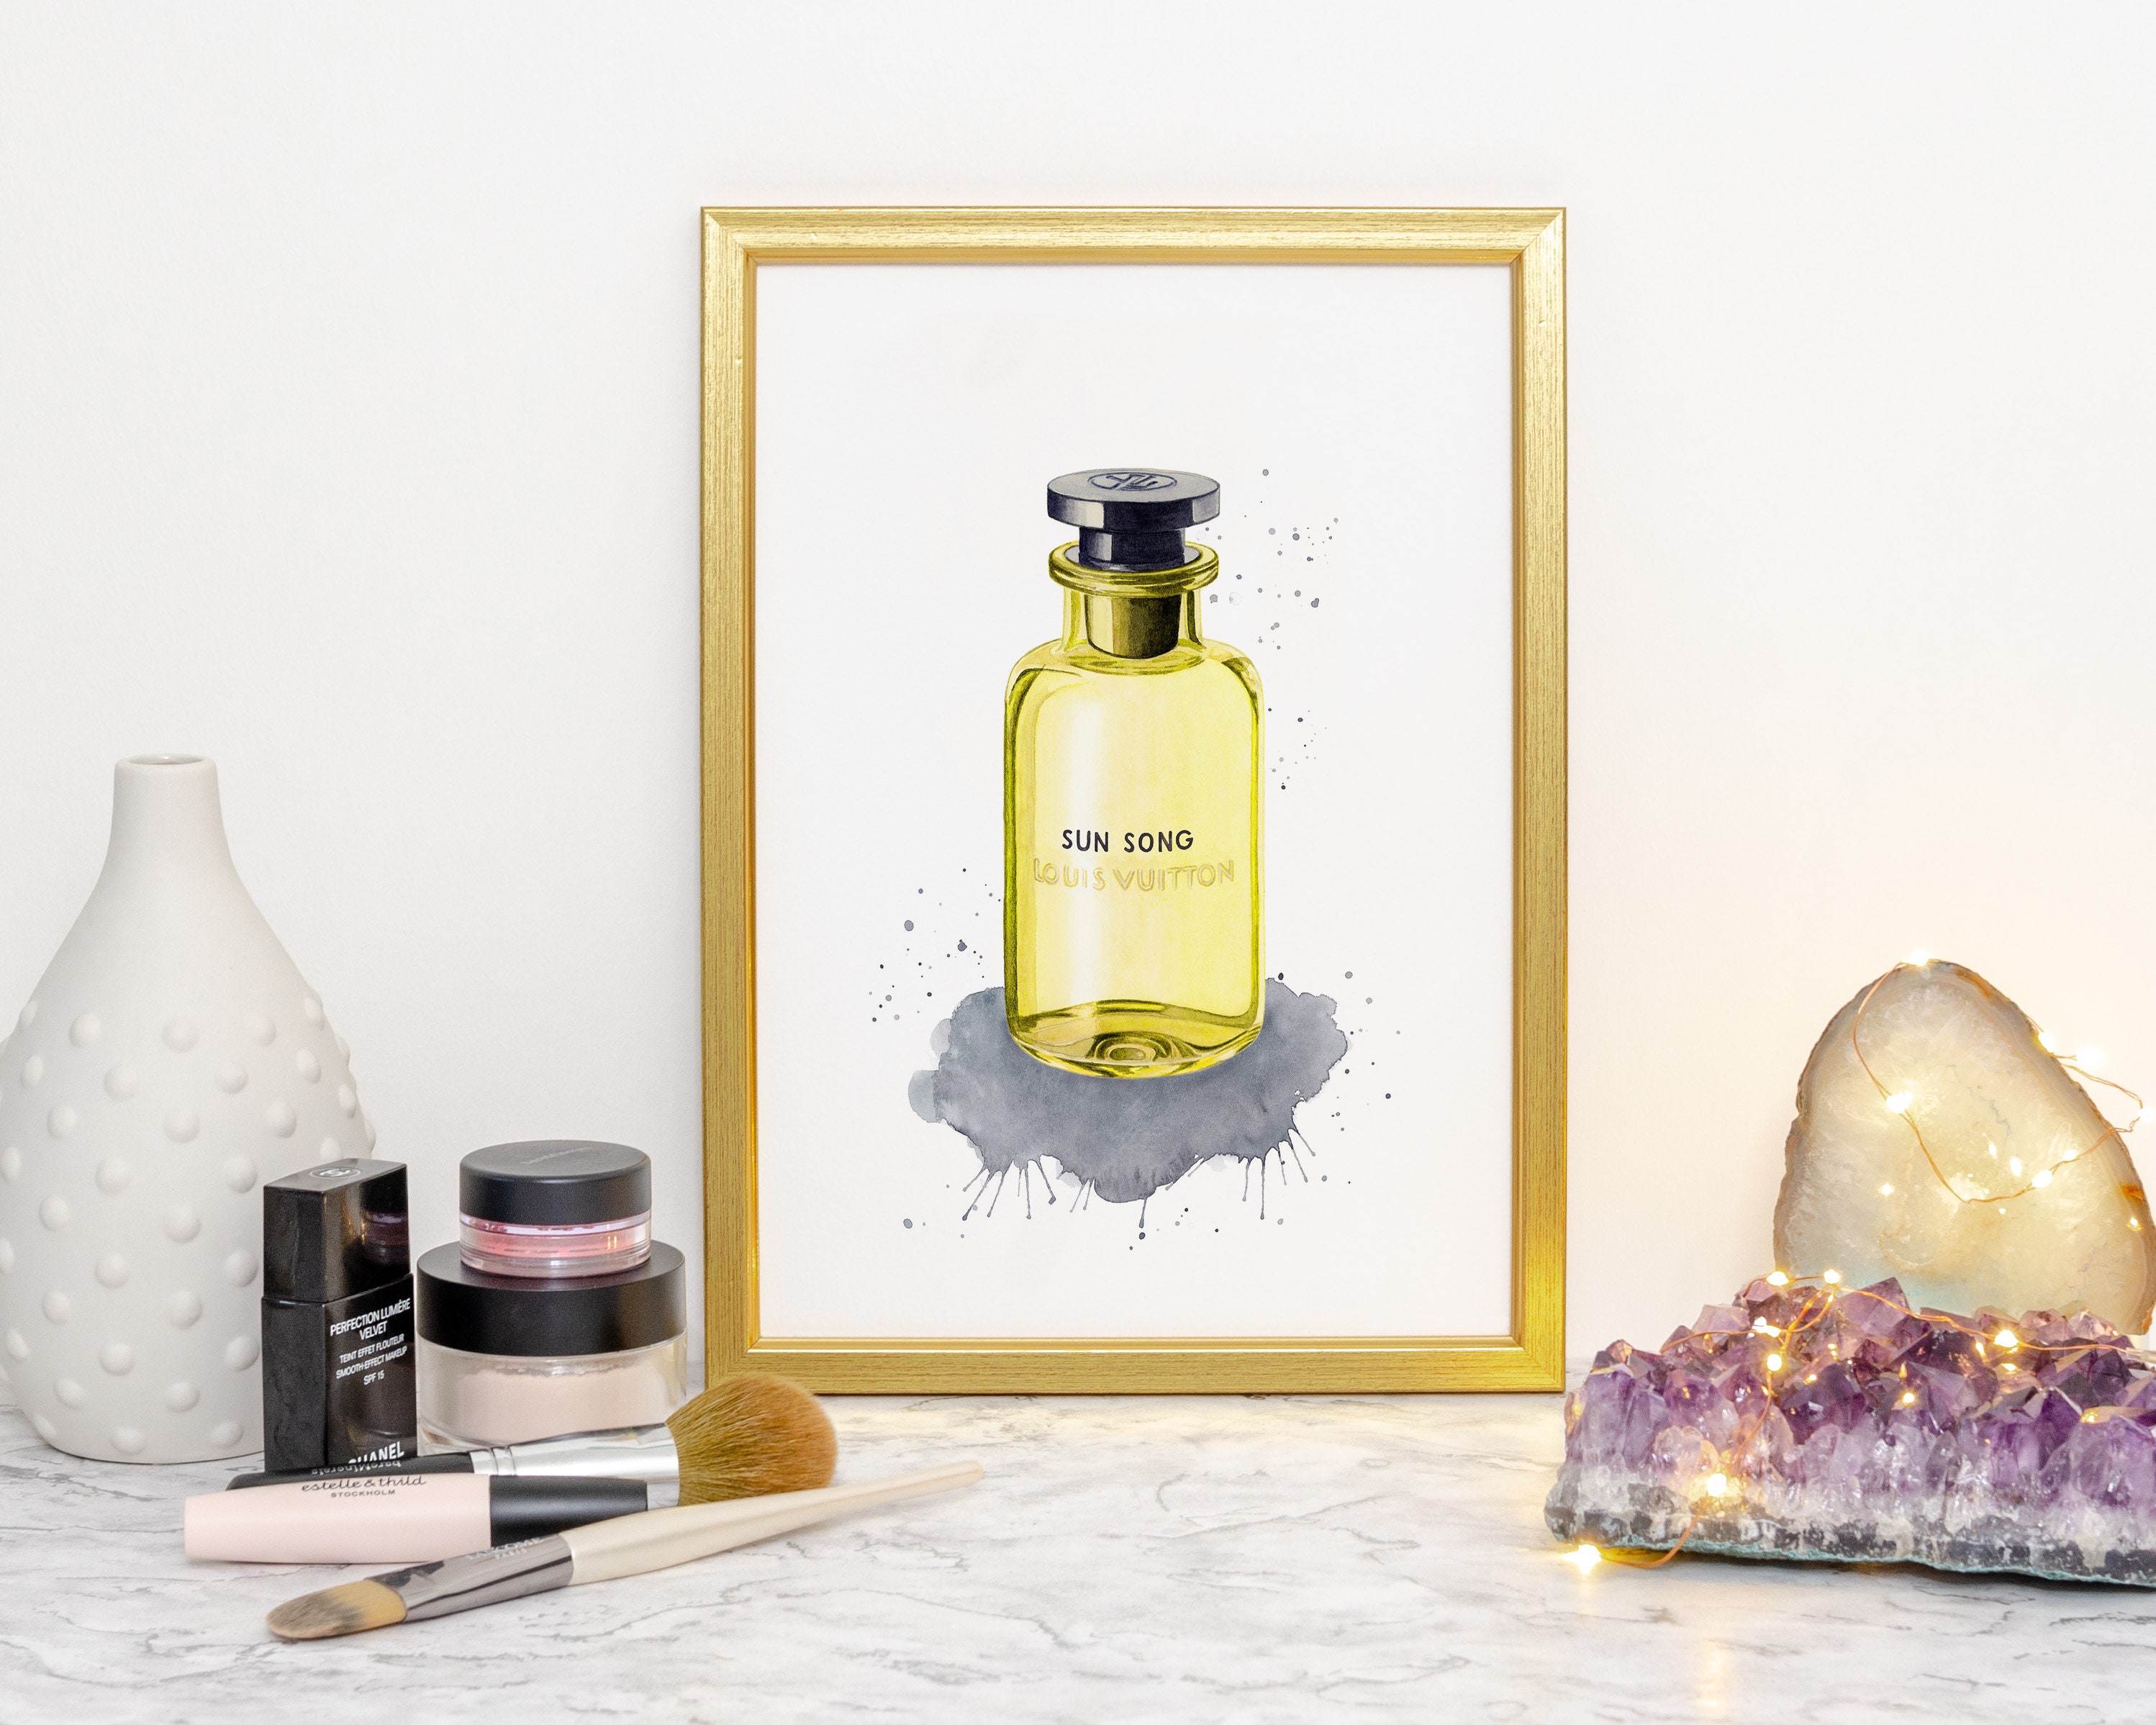 Sun Song by Louis Vuitton inspired pure fragrance oil for perfume